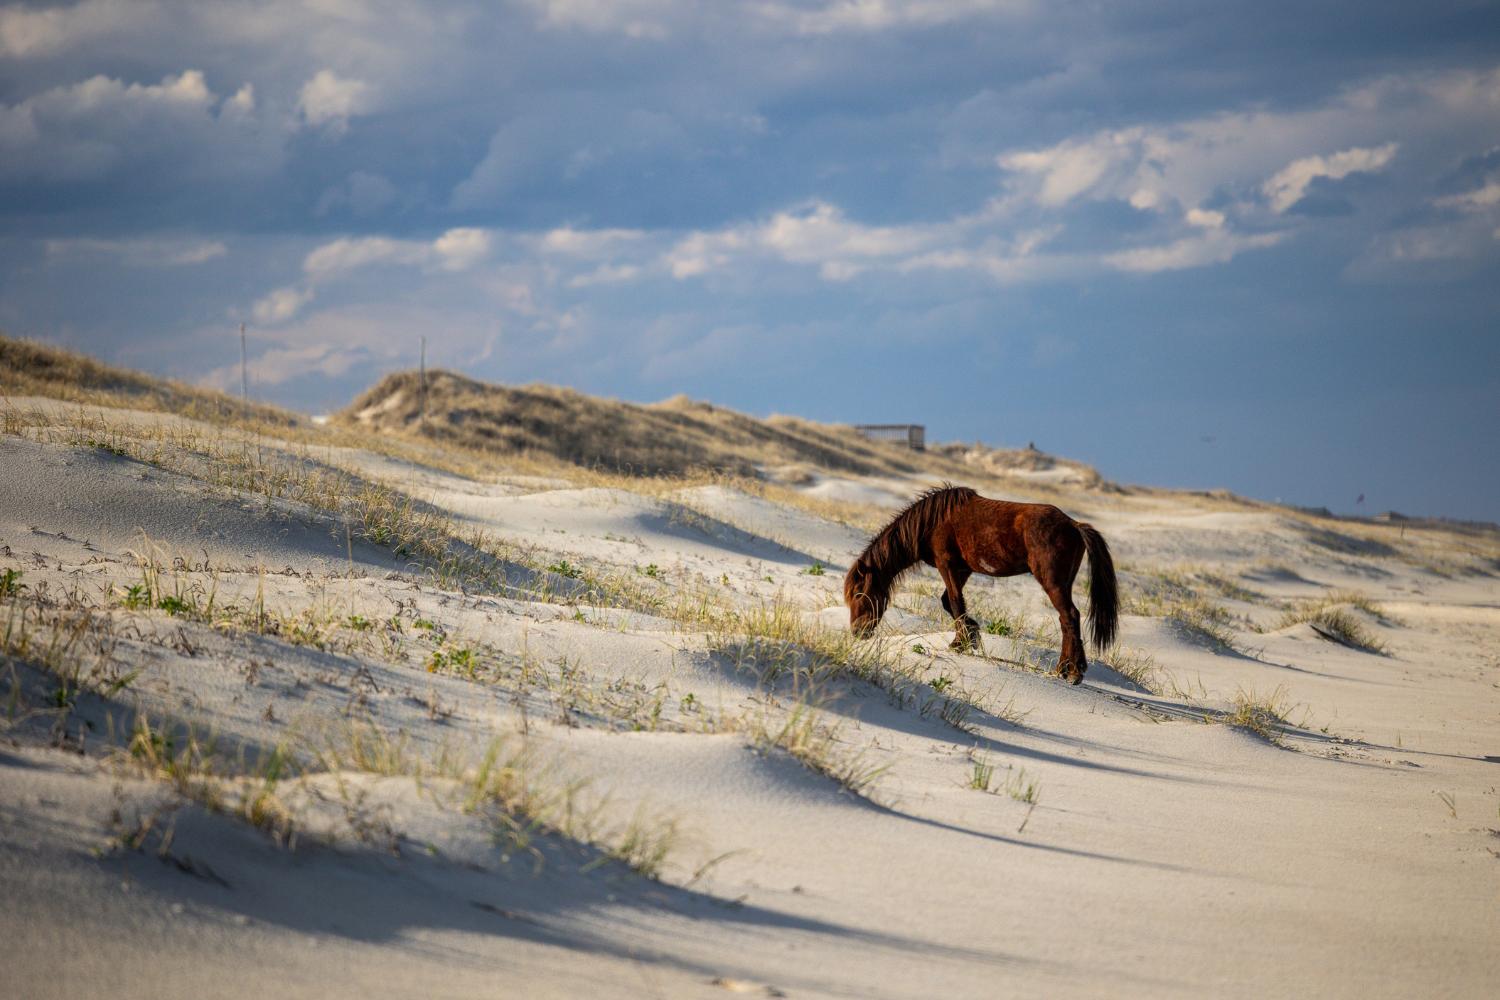 “Outer Banks Visionaries: Building North Carolina’s Oceanfront” by Clark Twiddy